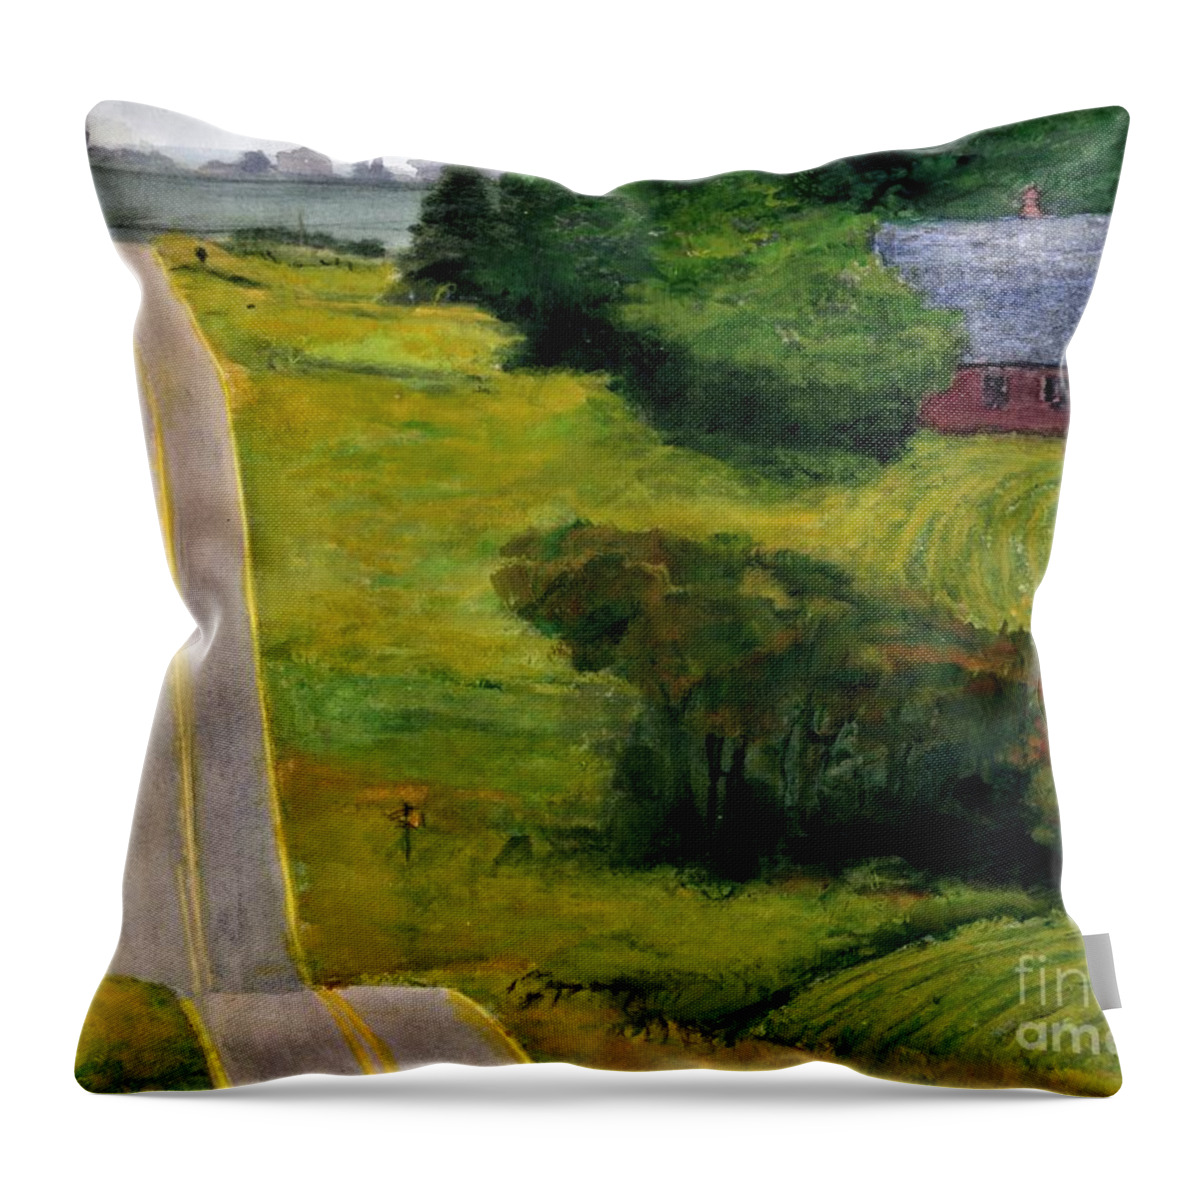 Iowa Throw Pillow featuring the painting Turkey Tailed Barn by Randy Sprout